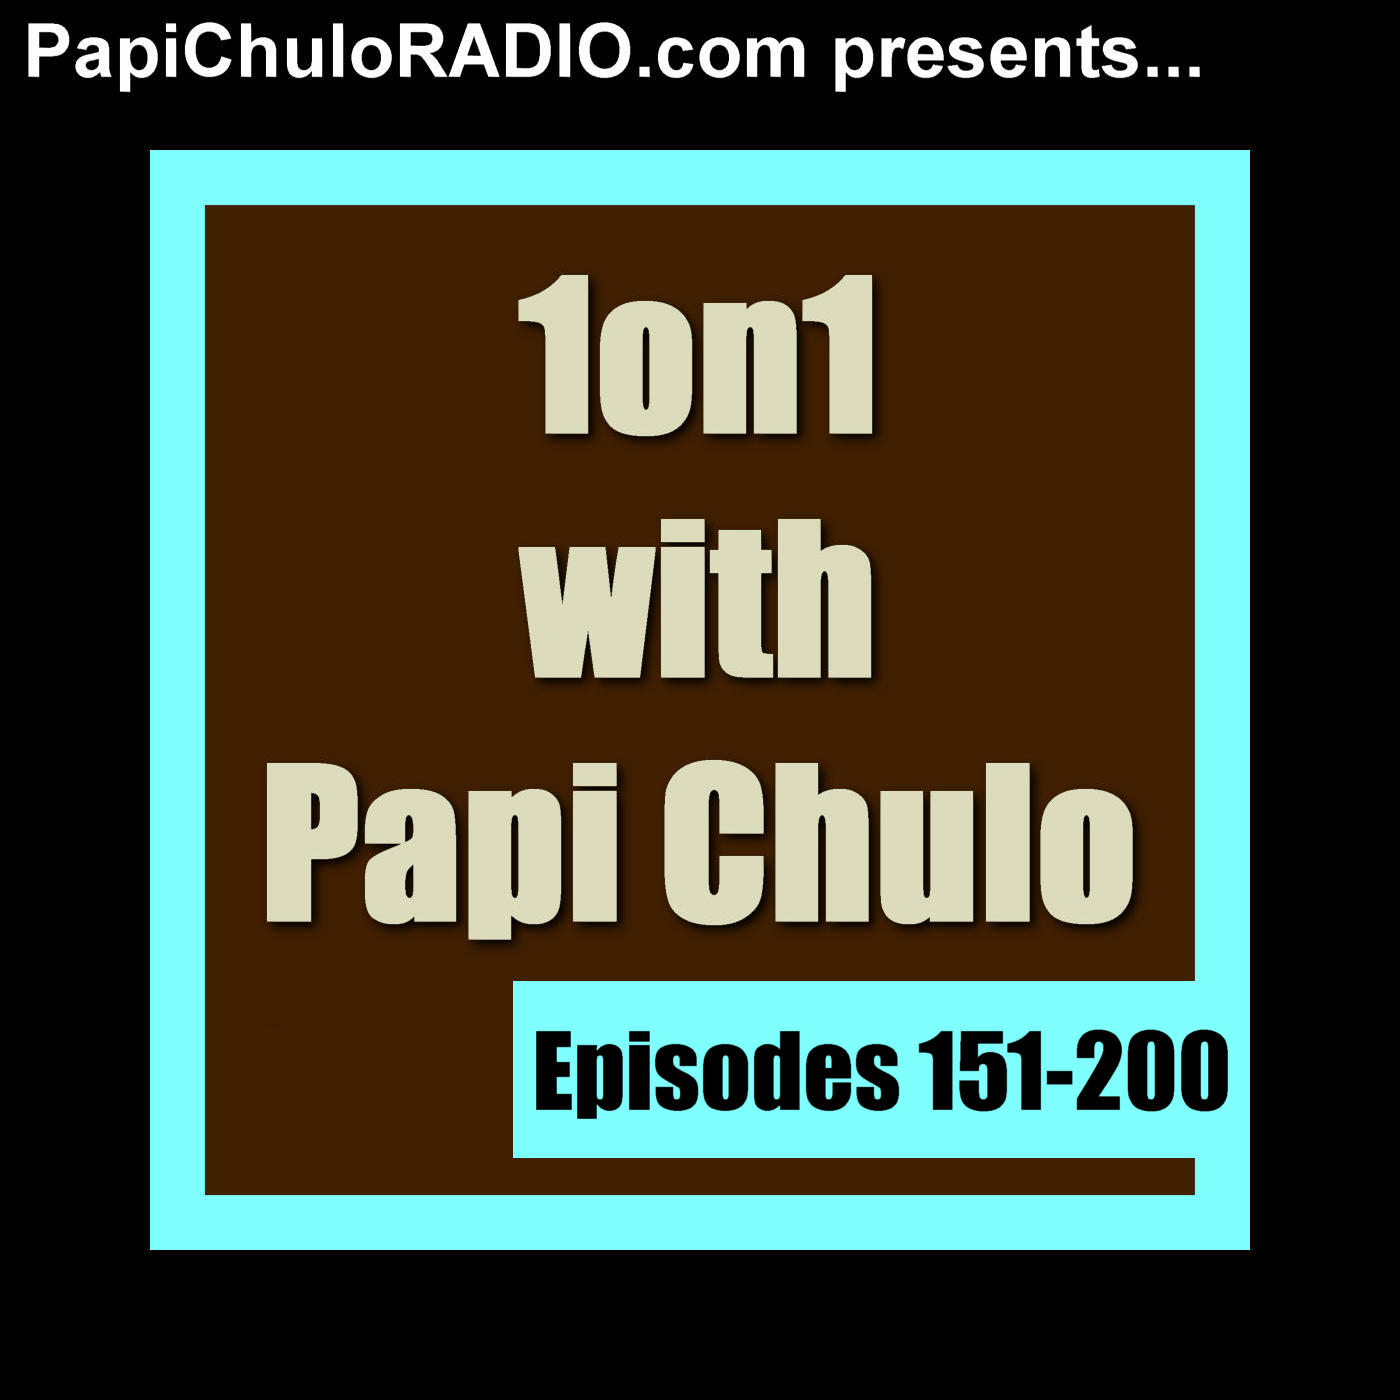 1on1 with Papi Chulo [Episodes 151-200] Podcast artwork